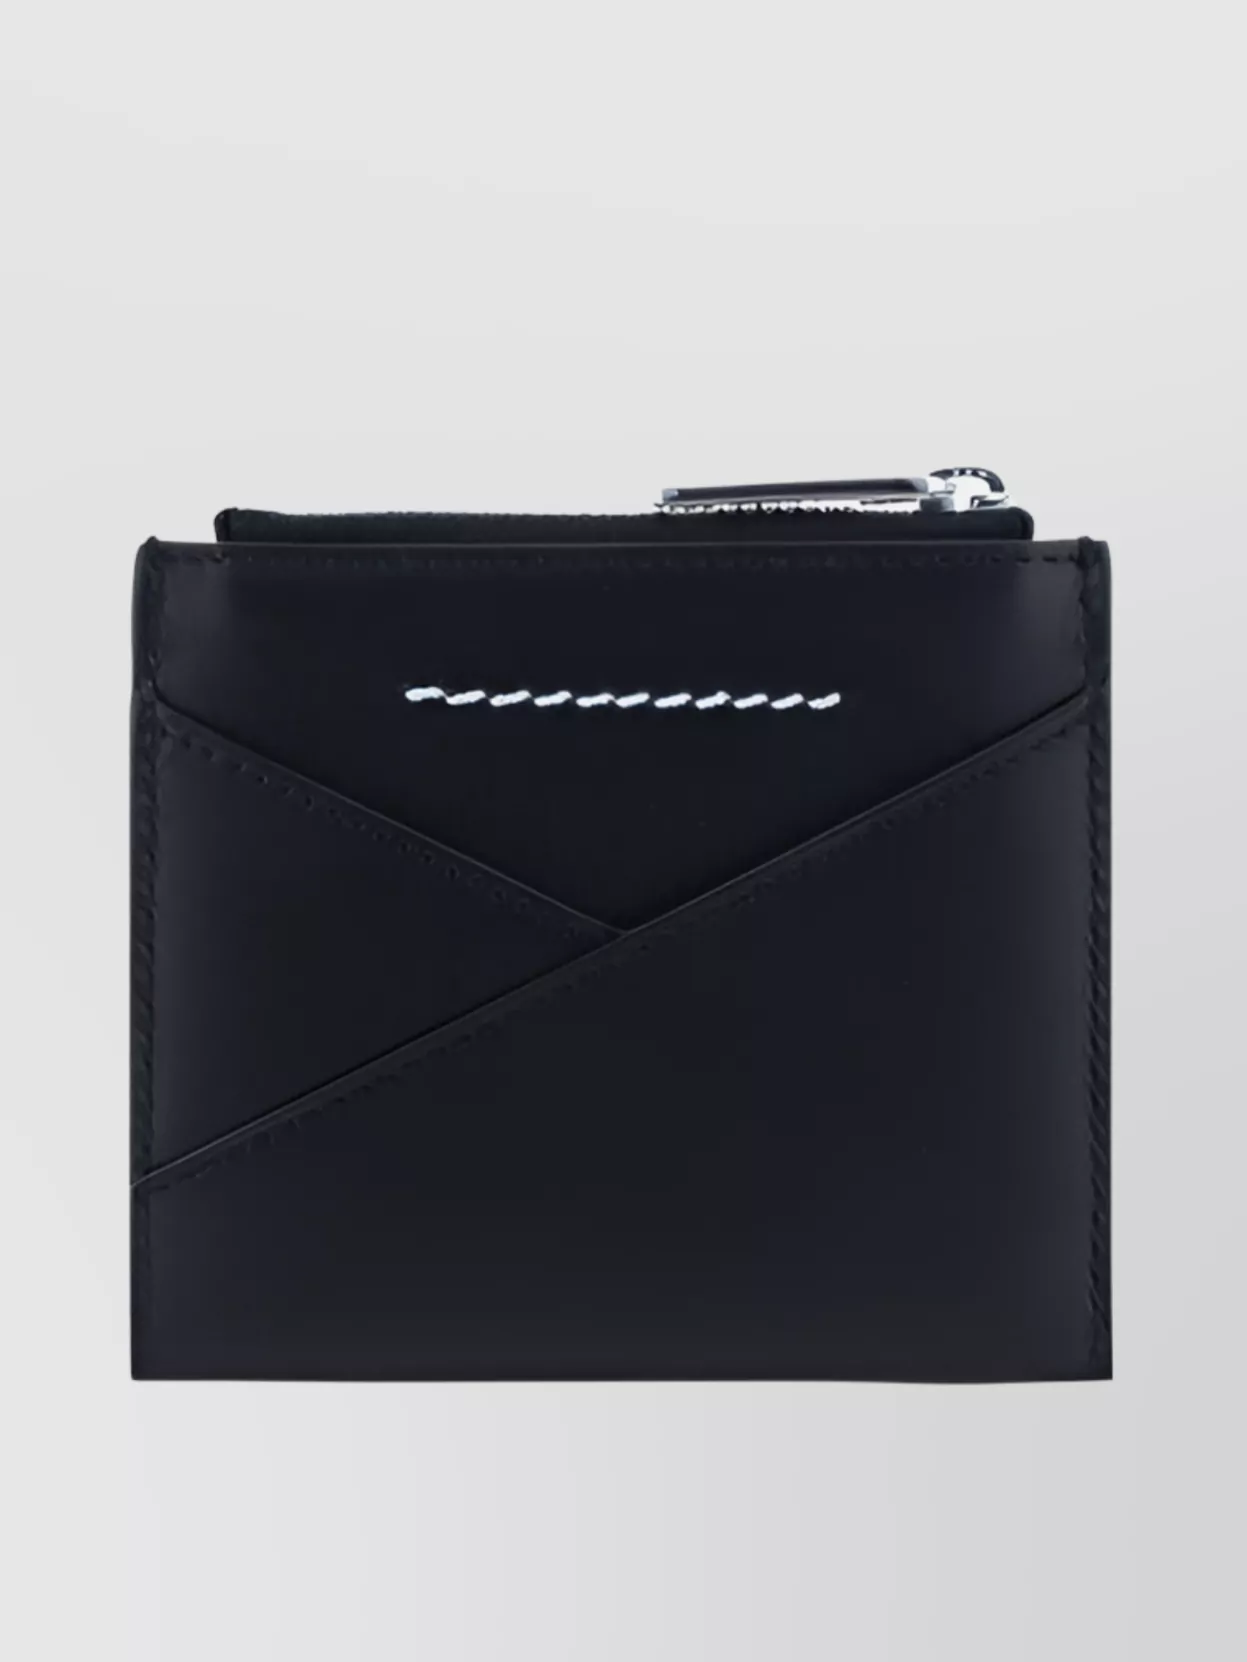 Mm6 Maison Margiela Coin Purse In Calfskin Leather With Stitched Detailing In Black